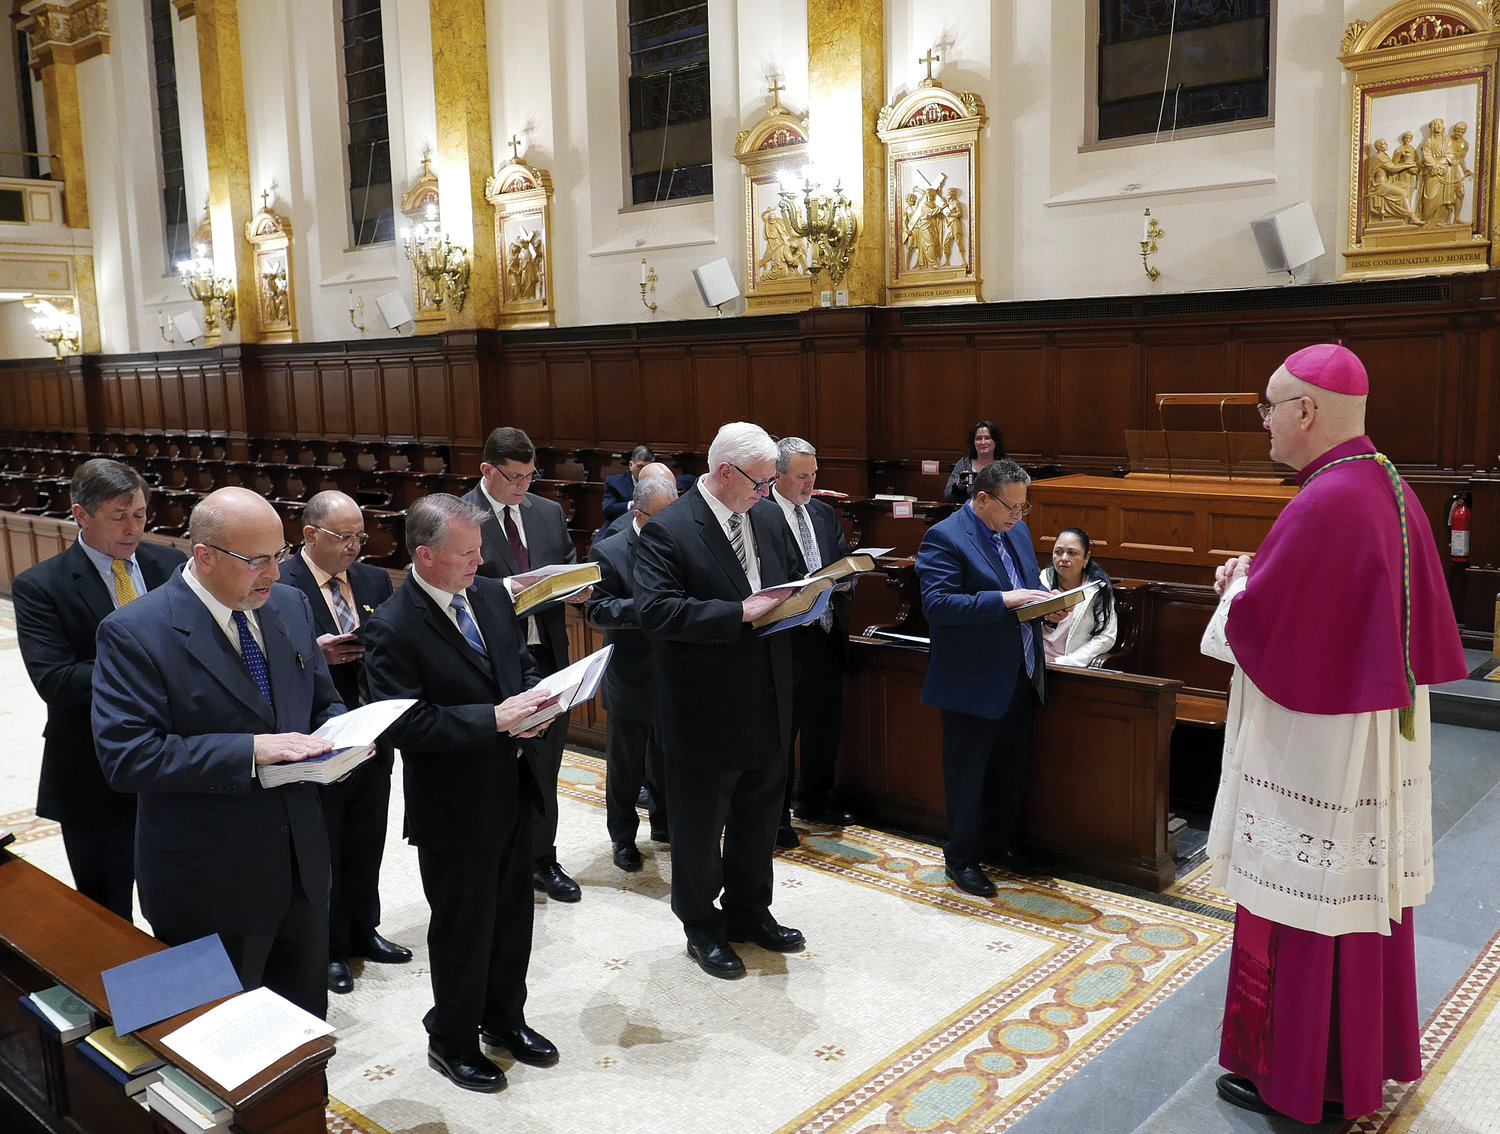 Auxiliary Bishop James Massa, rector of St. Joseph’s Seminary, Dunwoodie, leads the 10 men who will be ordained to the permanent diaconate Saturday, June 18, in the Call to the Order of Deacon in the seminary chapel. The May 10 ceremony included an oath of fidelity and profession of faith.